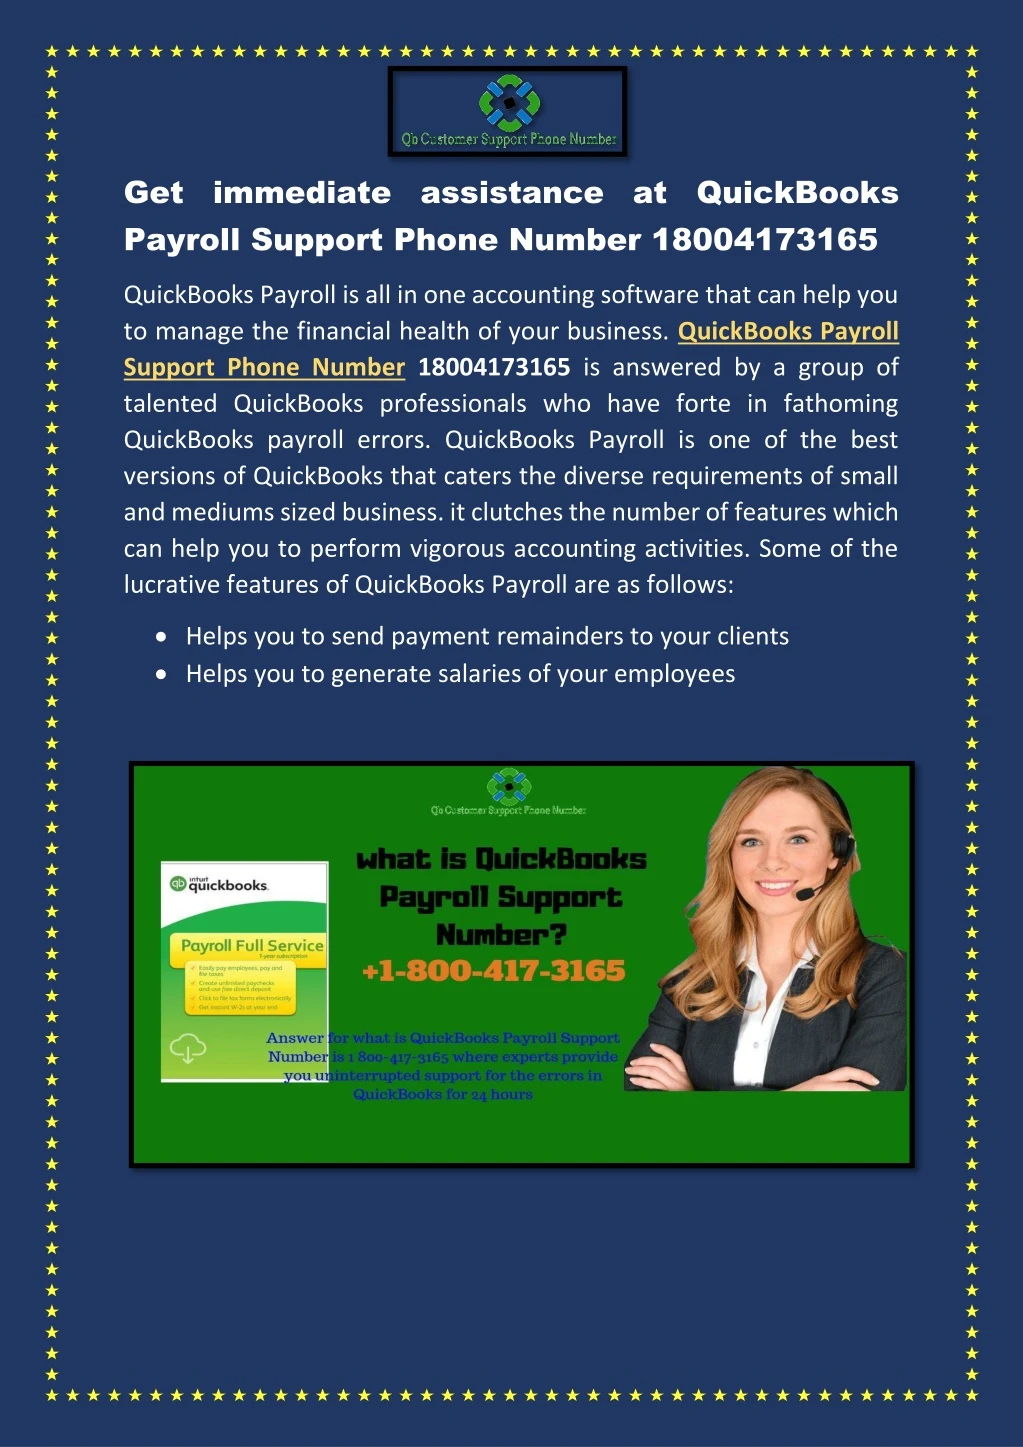 get immediate assistance at quickbooks payroll